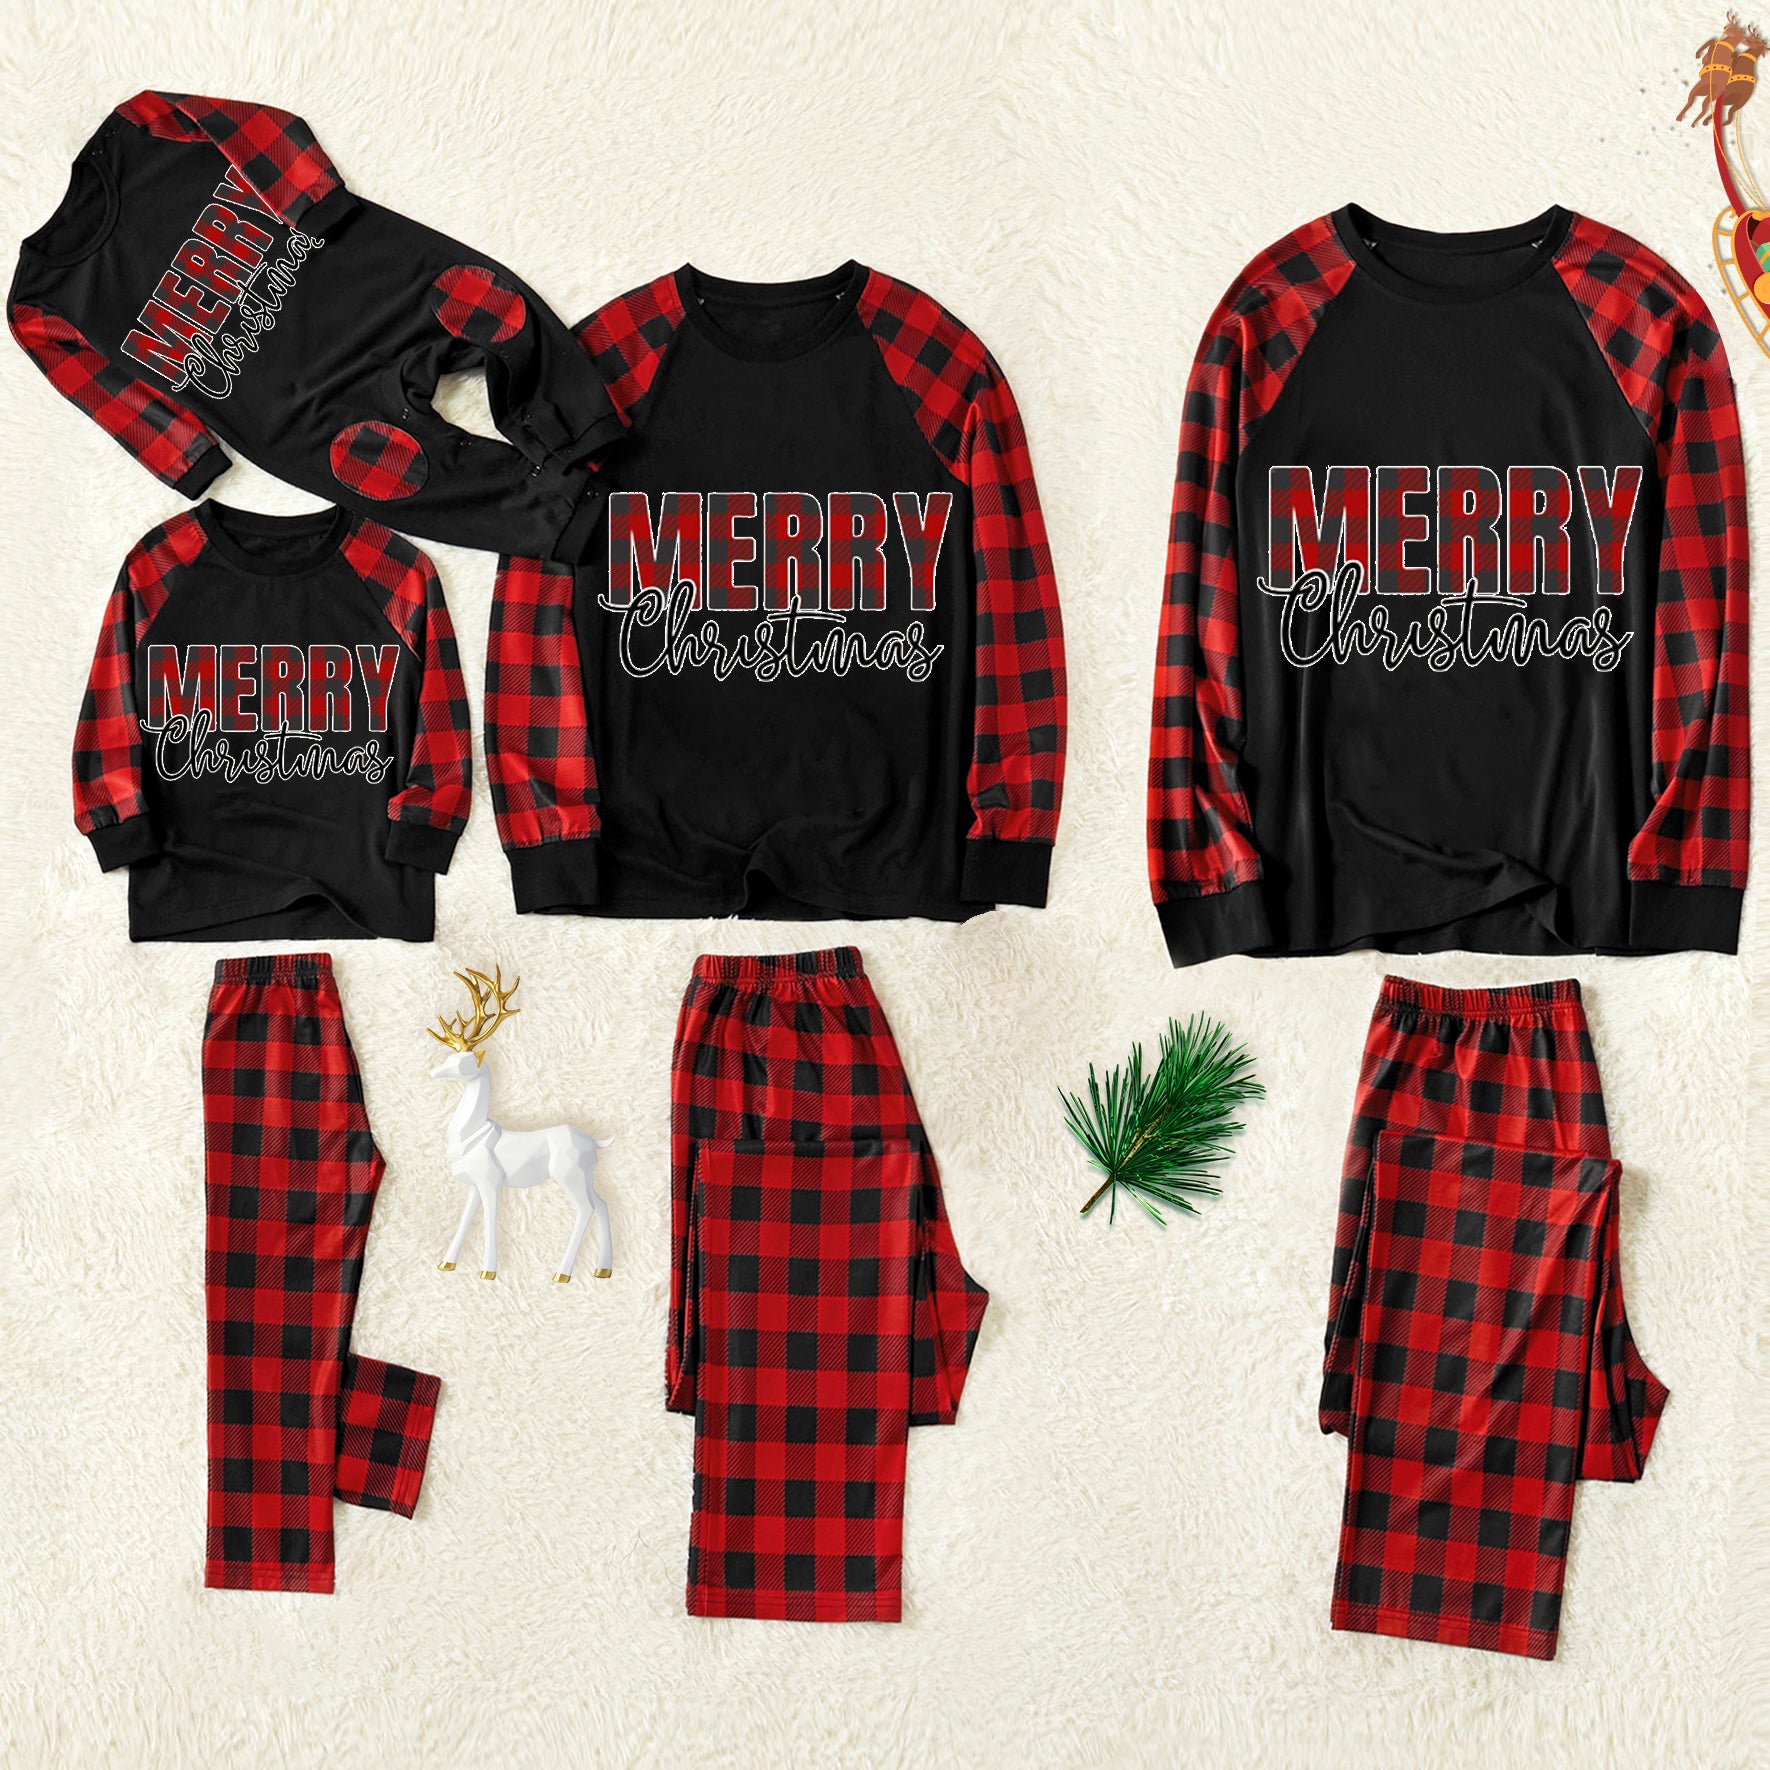 Christmas "Merry Christmas" Letter Print Patterned Contrast Black top and Black & Red Plaid Pants Family Matching Pajamas Set